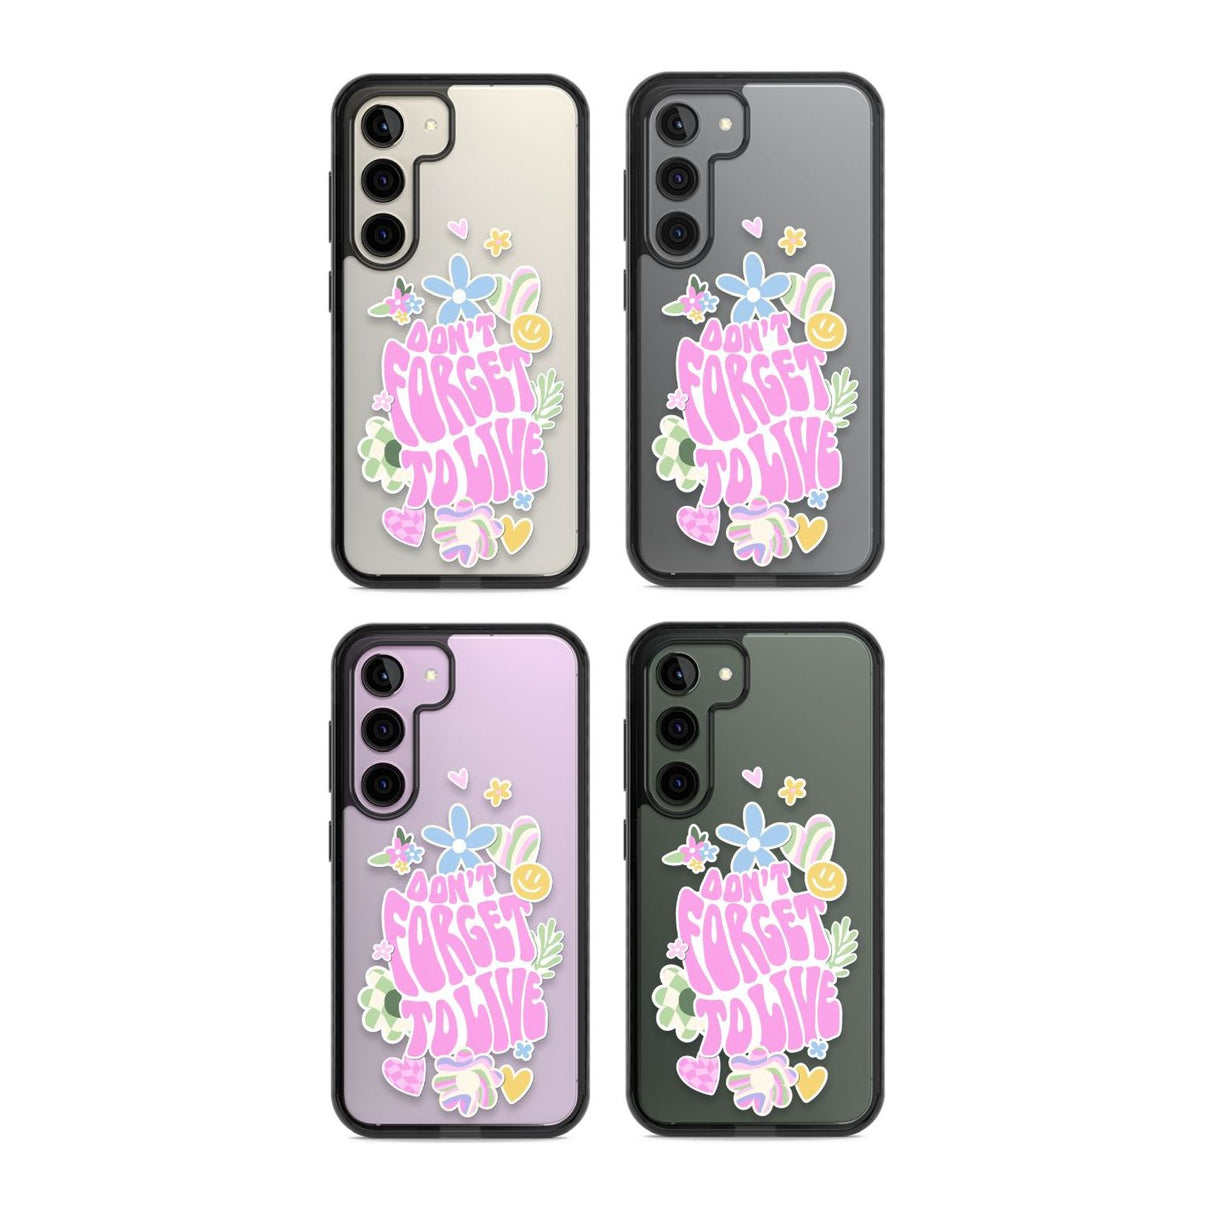 Don't Forget To Live Phone Case iPhone 15 Pro Max / Black Impact Case,iPhone 15 Plus / Black Impact Case,iPhone 15 Pro / Black Impact Case,iPhone 15 / Black Impact Case,iPhone 15 Pro Max / Impact Case,iPhone 15 Plus / Impact Case,iPhone 15 Pro / Impact Case,iPhone 15 / Impact Case,iPhone 15 Pro Max / Magsafe Black Impact Case,iPhone 15 Plus / Magsafe Black Impact Case,iPhone 15 Pro / Magsafe Black Impact Case,iPhone 15 / Magsafe Black Impact Case,iPhone 14 Pro Max / Black Impact Case,iPhone 14 Plus / Black 